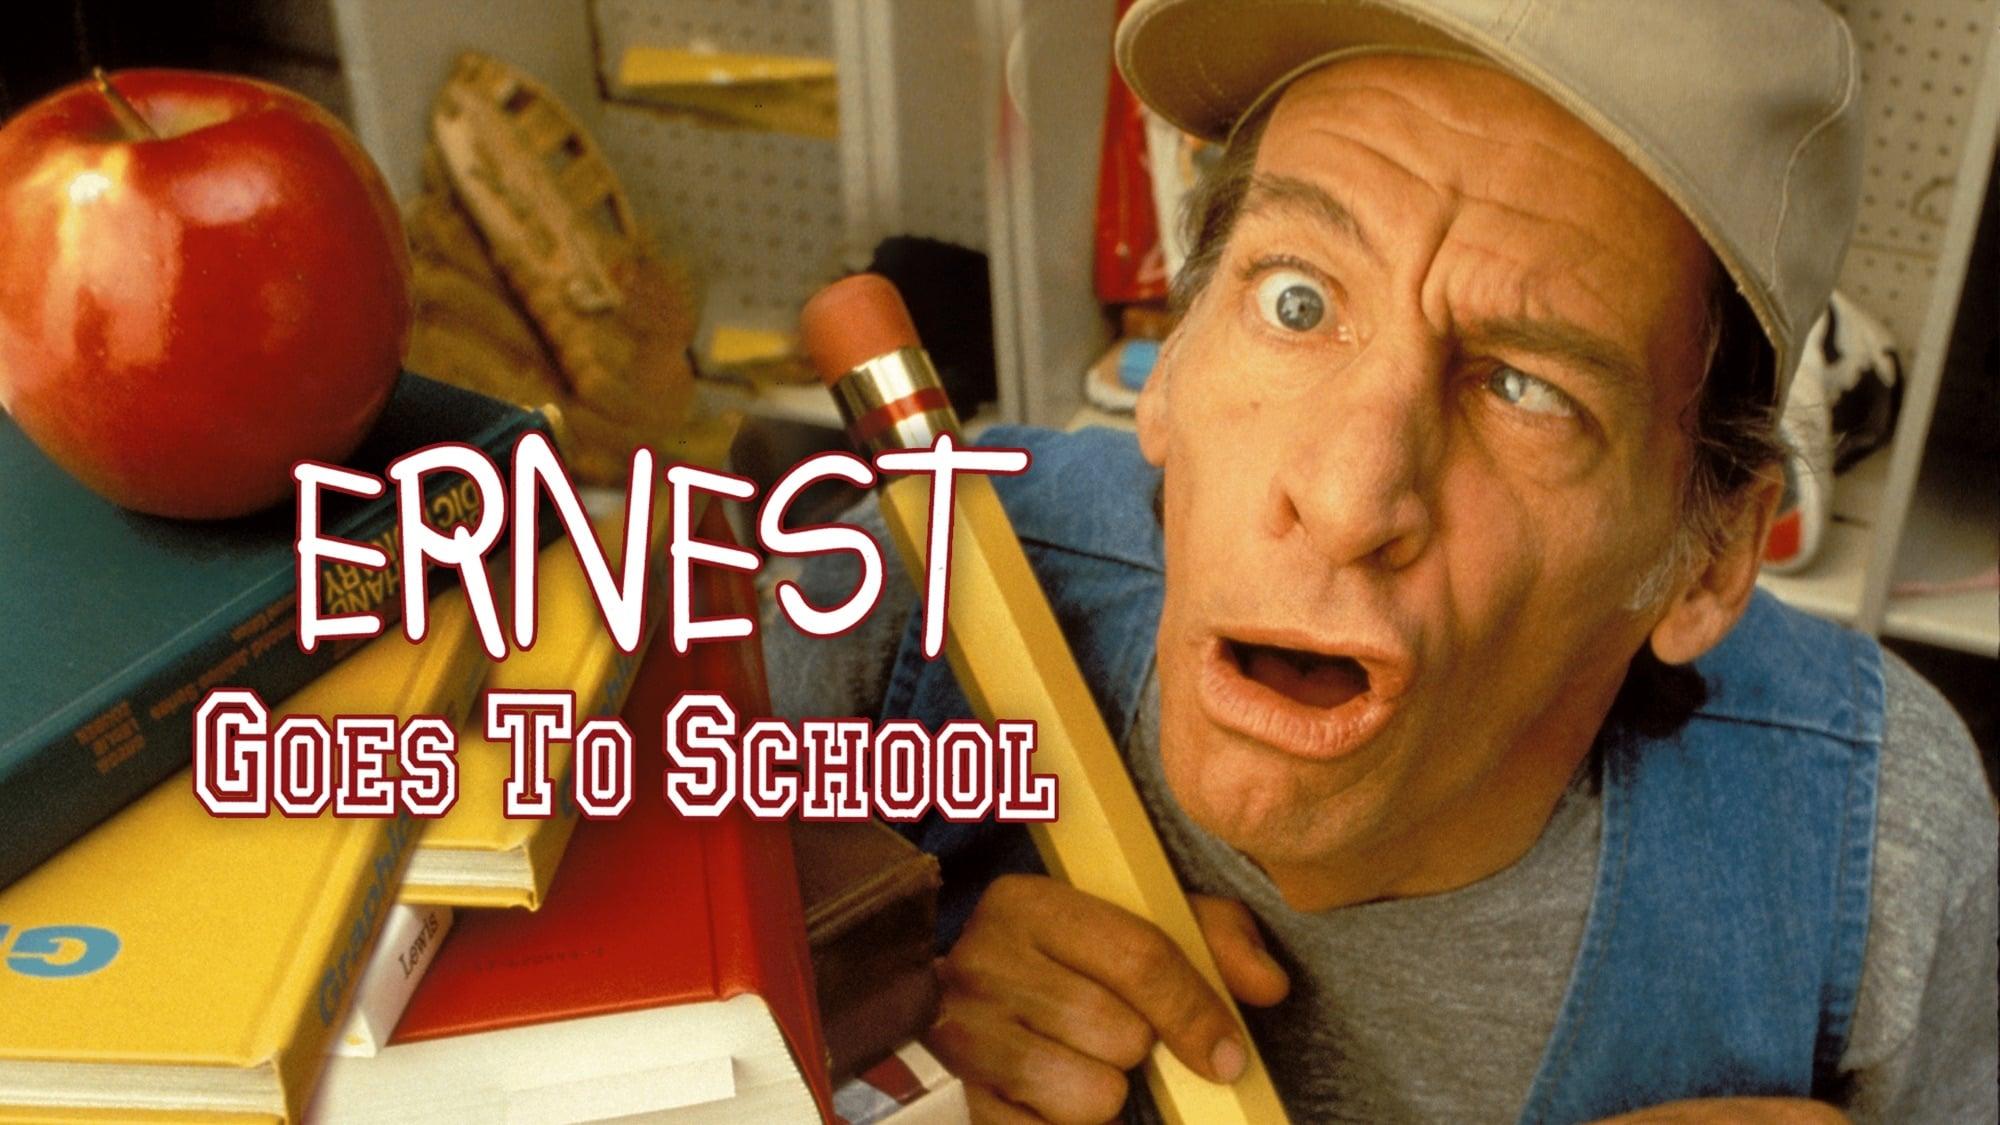 Ernest Goes to School backdrop